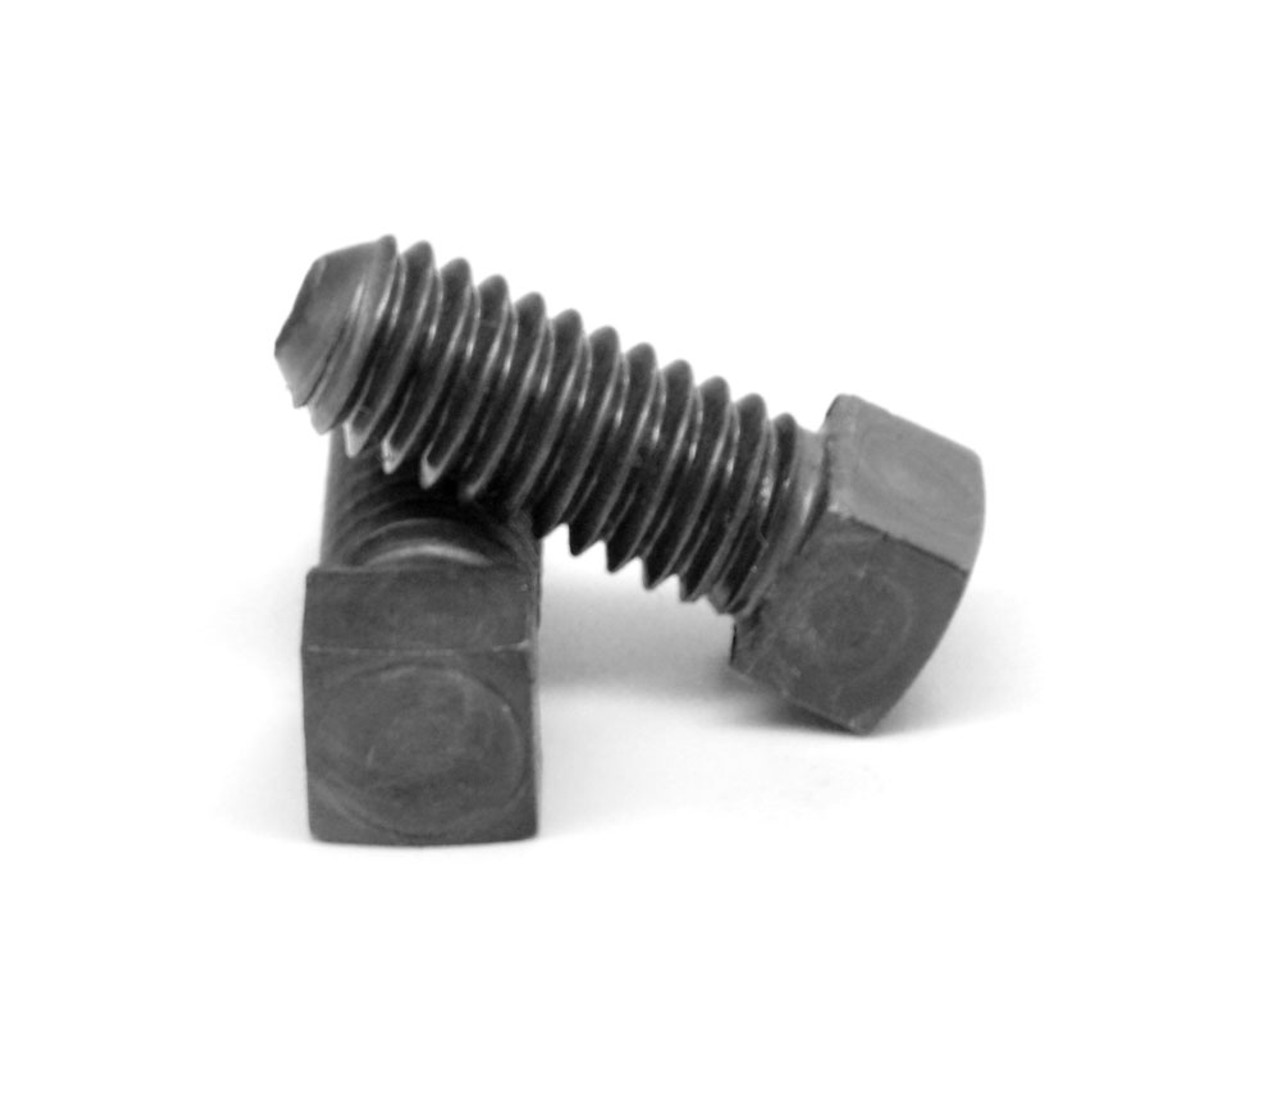 5/16"-18 x 2" (FT) Coarse Thread Square Head Set Screw Cup Point Through Hardened Alloy Steel Plain Finish